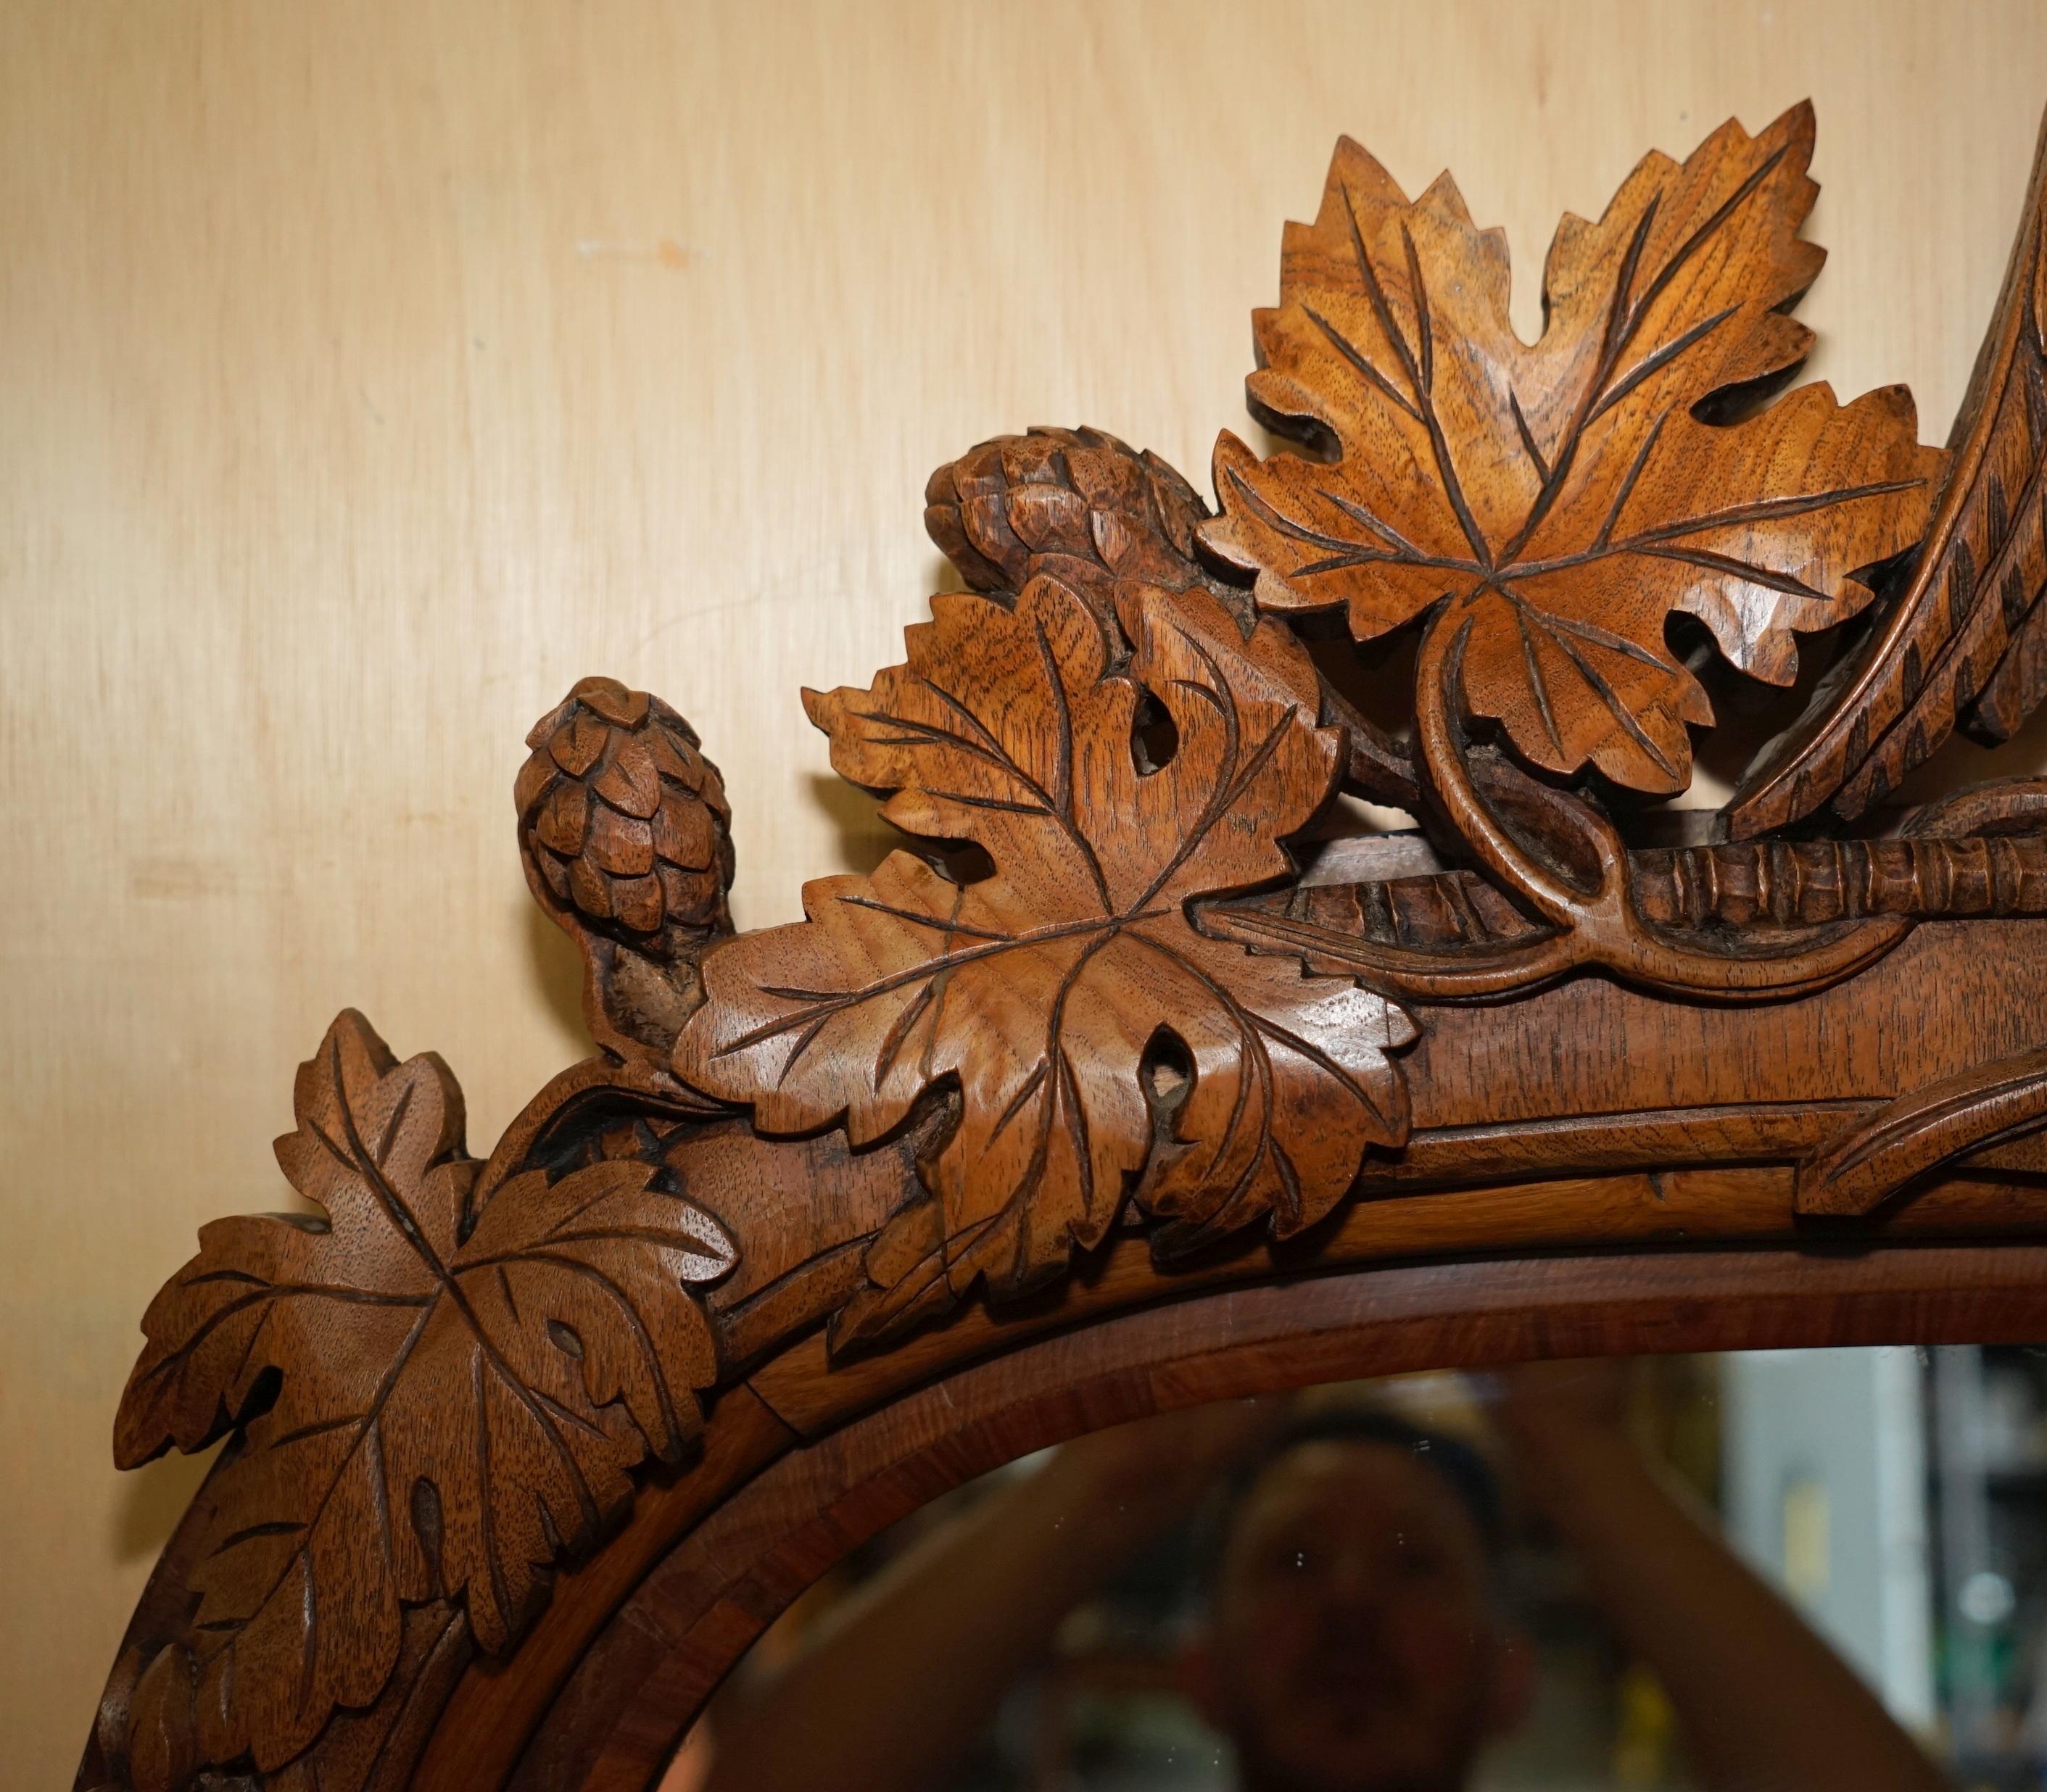 Mirror STUNNING ANTIQUE ViCTORIAN HAND CARVED CIR 1860 AMERICAN EAGLE OVERMANTLE MIRROR For Sale